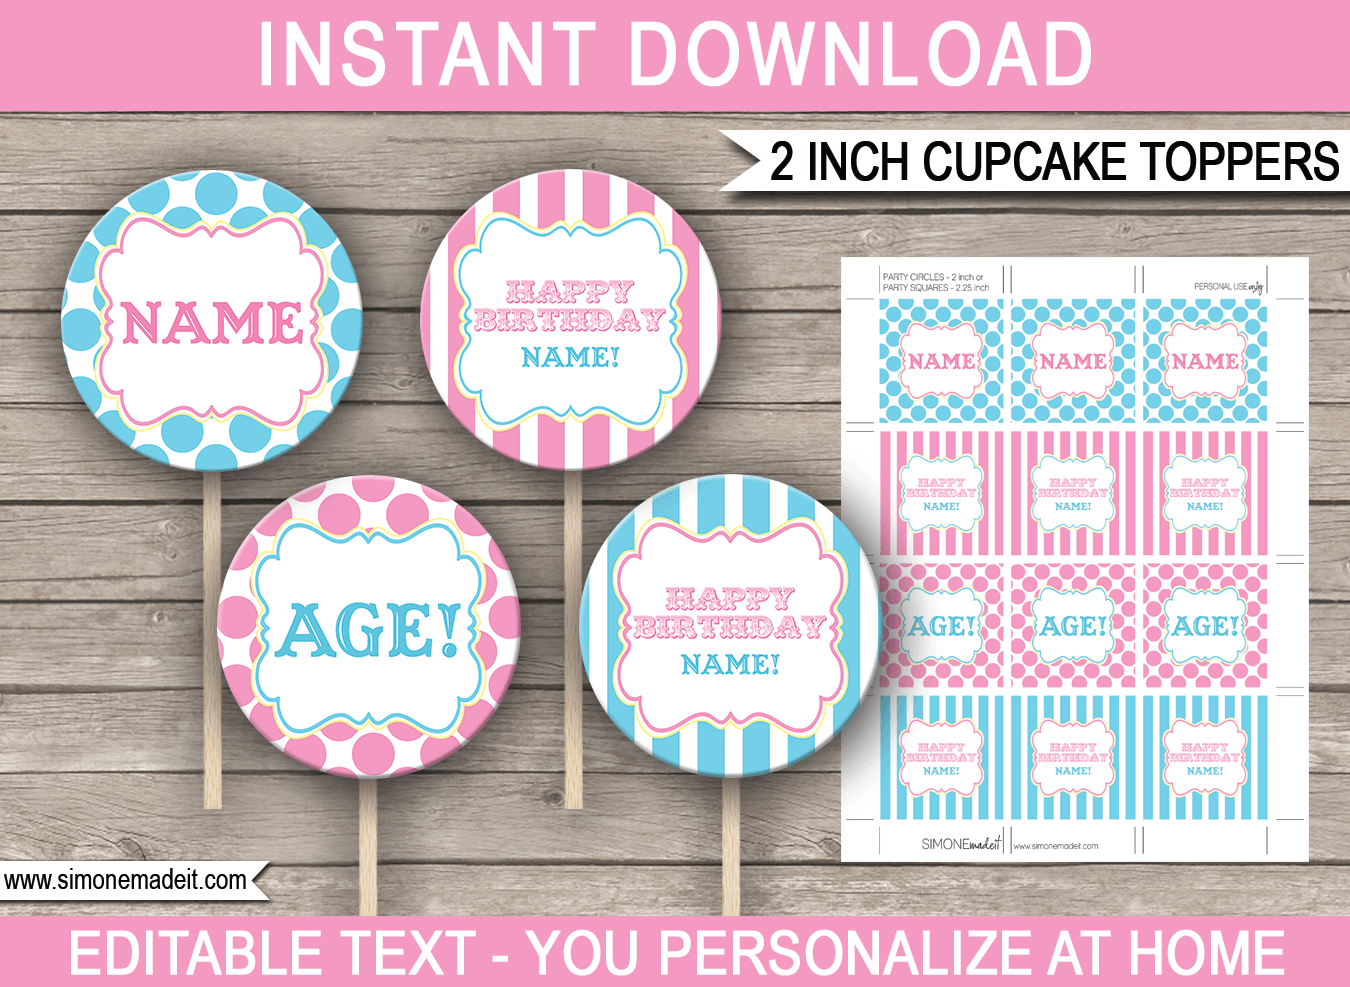 Printable Carnival Birthday Cupcake Toppers Template | Carnival or Circus Theme Decorations | 2 inch | Gift Tags | INSTANT DOWNLOAD via simonemadeit.com